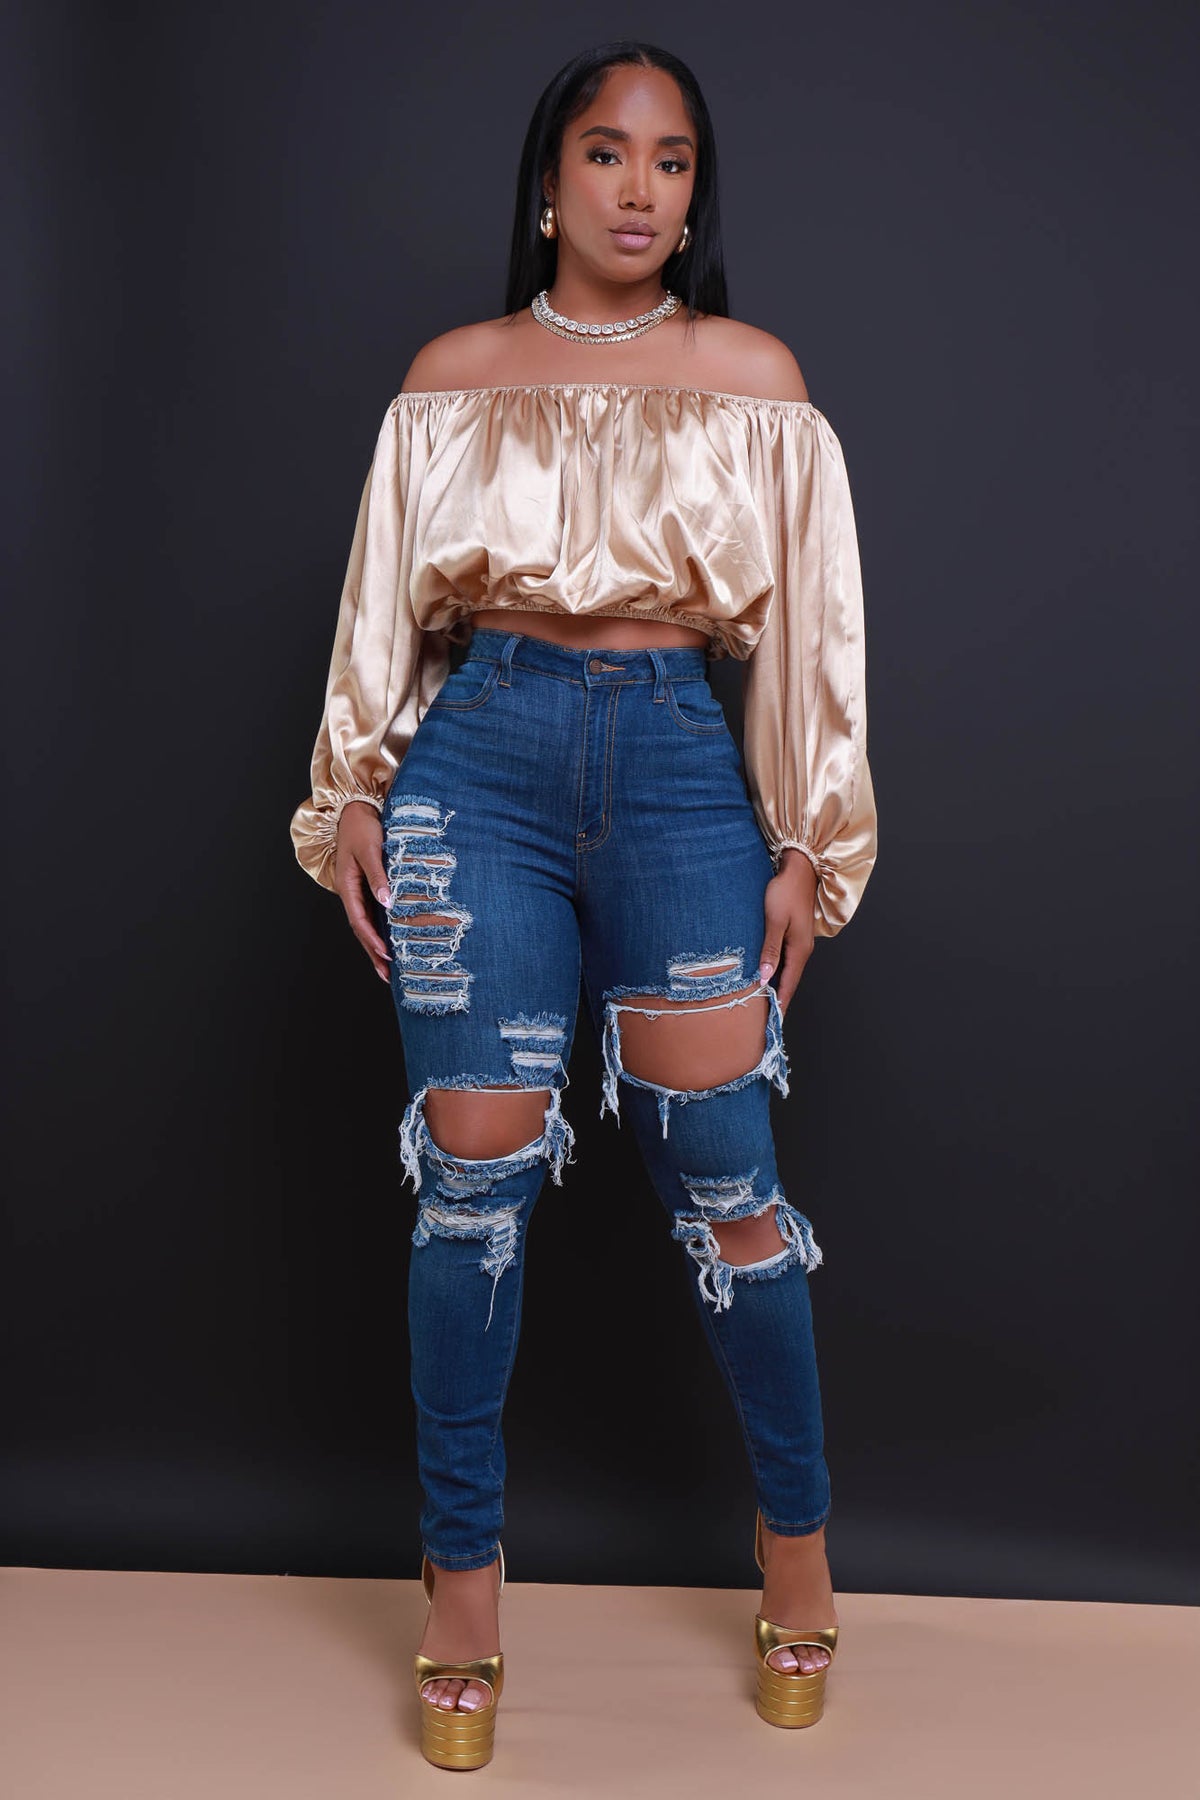 tetraeder Automatisering Sind All For You Off The Shoulder Crop Top - Champagne - Swank A Posh